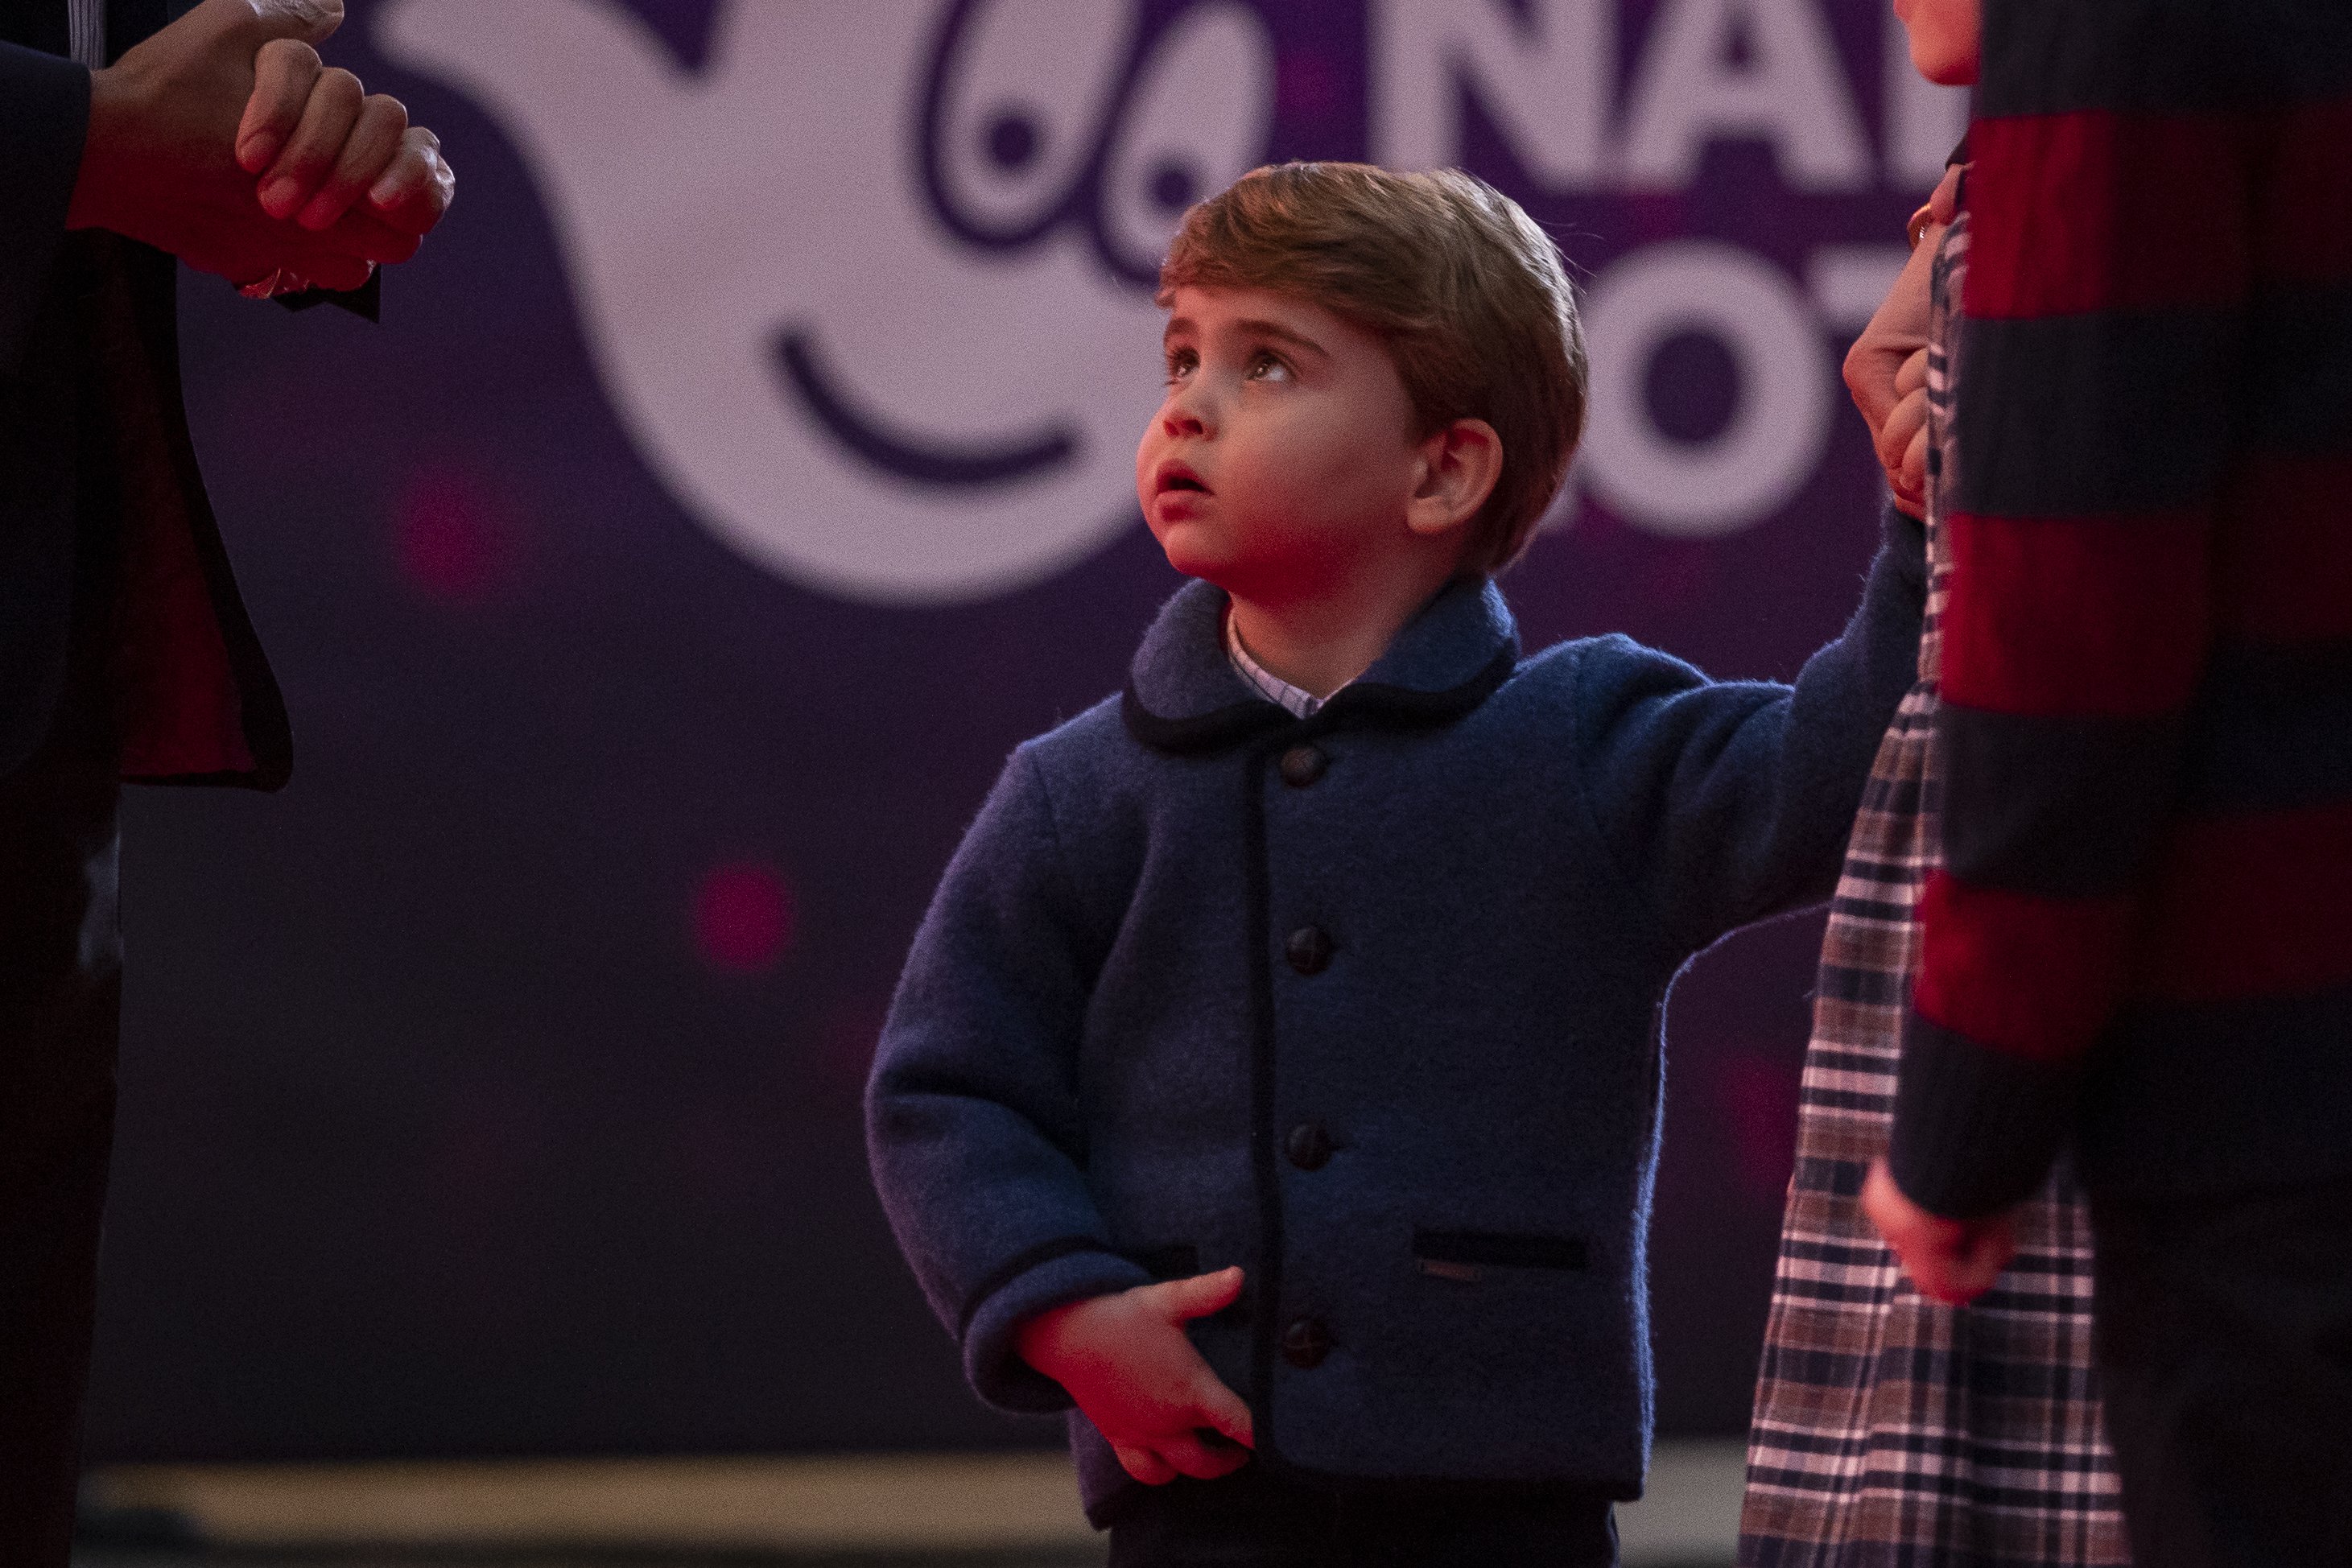 Prince Louis attends a special pantomime performance at London's Palladium Theatre, hosted by The National Lottery, to thank key workers and their families for their efforts throughout the pandemic on December 11, 2020, in London, England. | Source: Getty Images